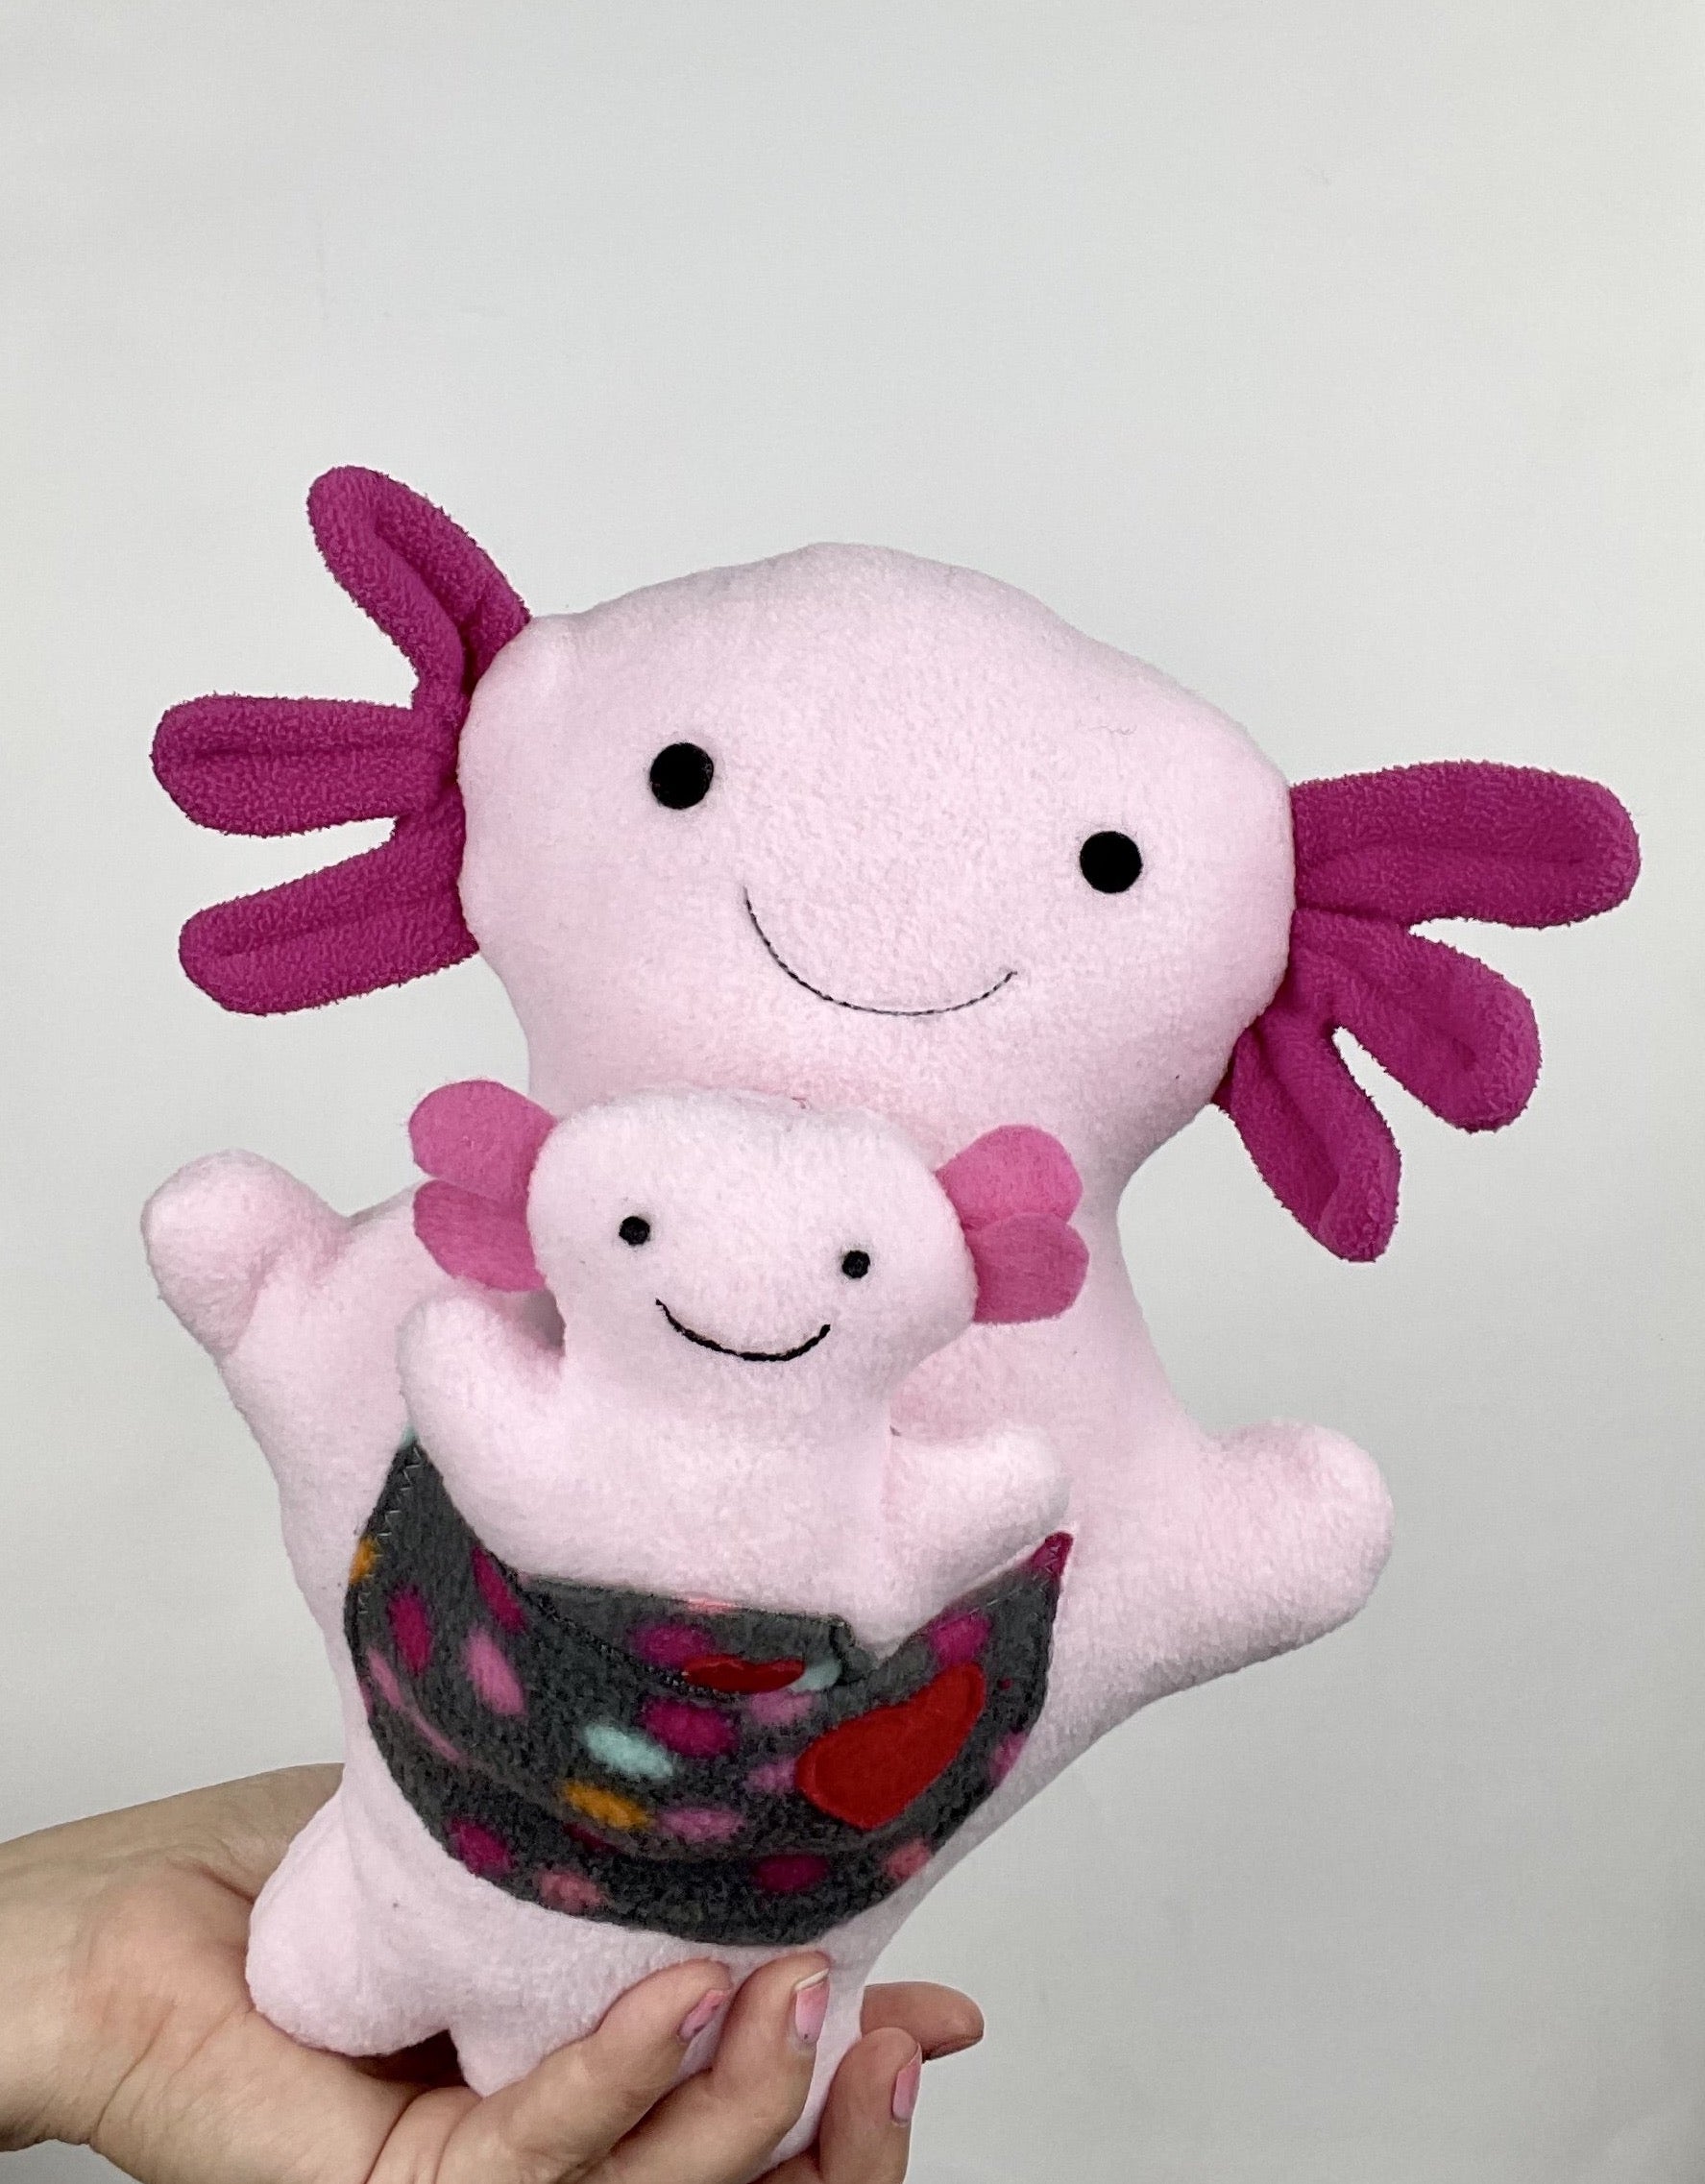 larger pink Axolotl stuffed animal with a baby axolotl stuffed animal in its pocket